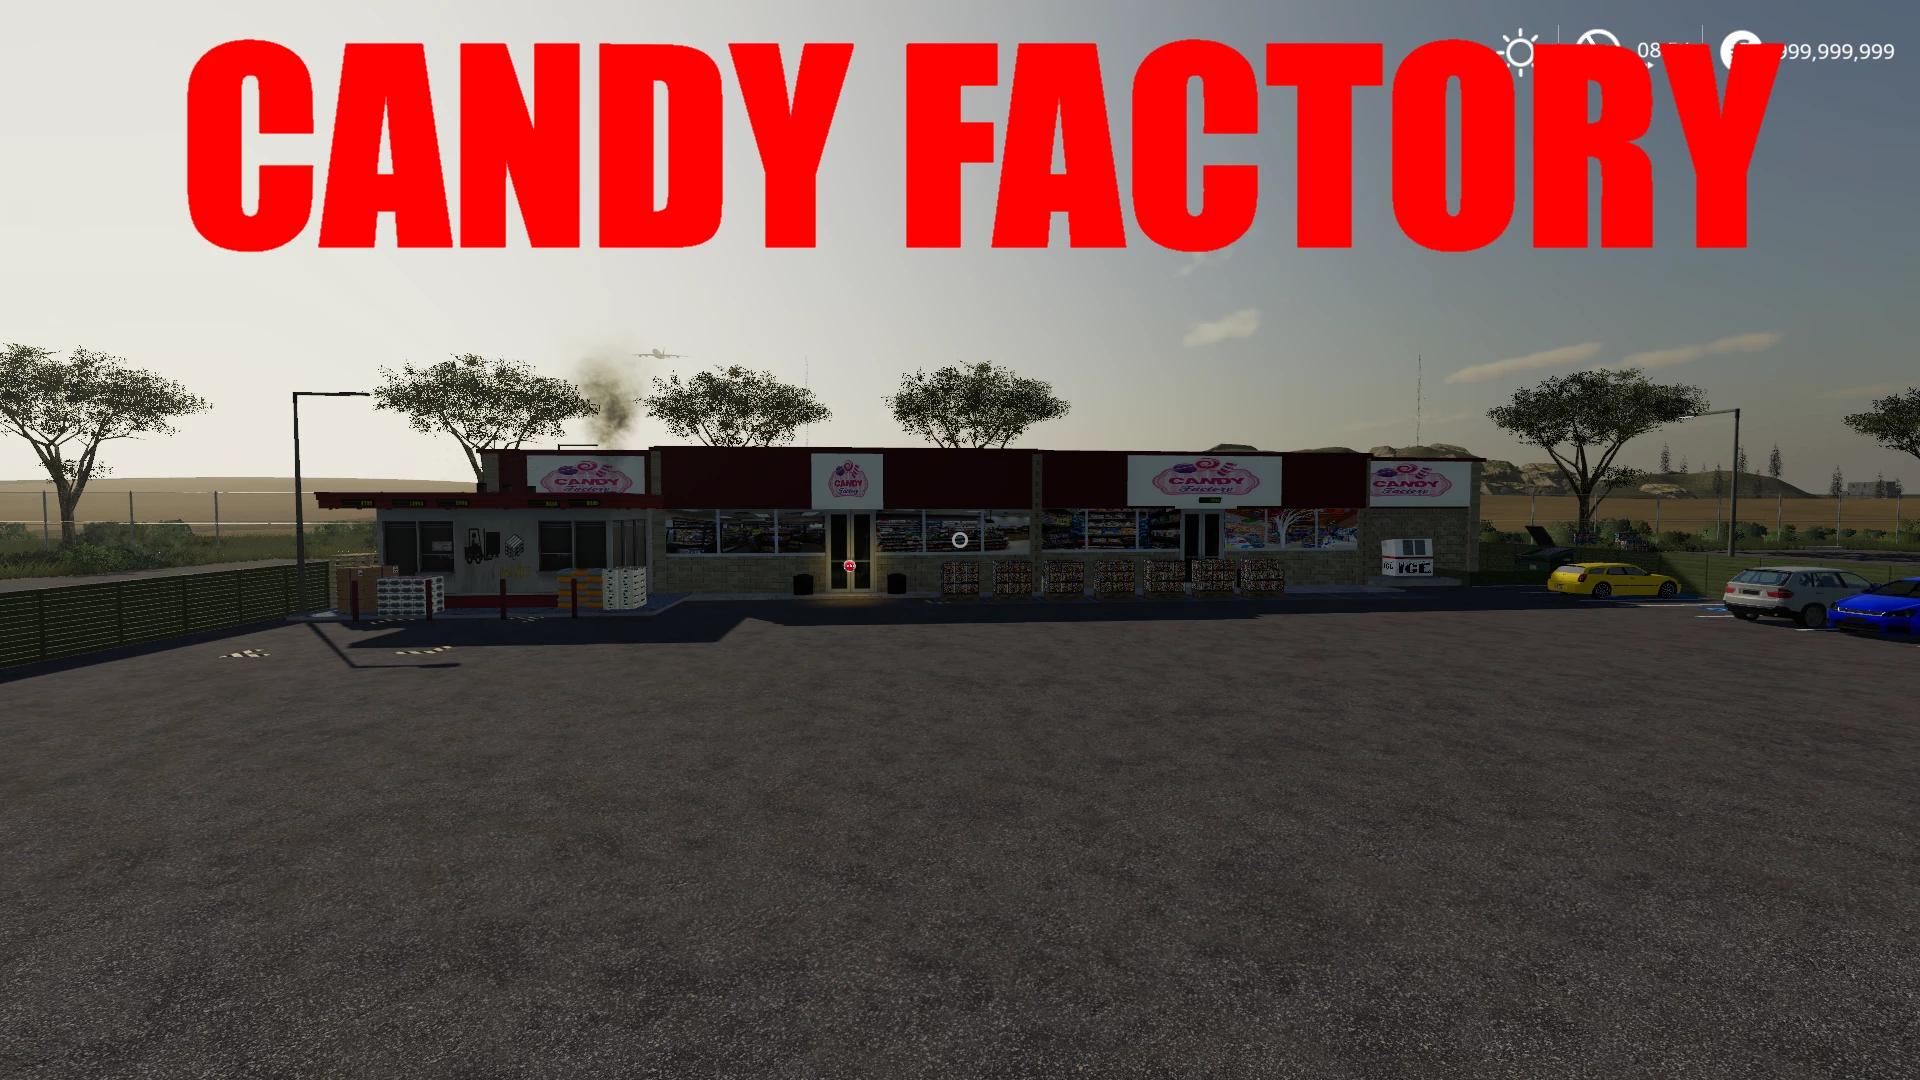 Фабрика 5 0. Candy Factory. Карта фабрика Кэнди 2. Candy Factory building. Flour Factory fs19.